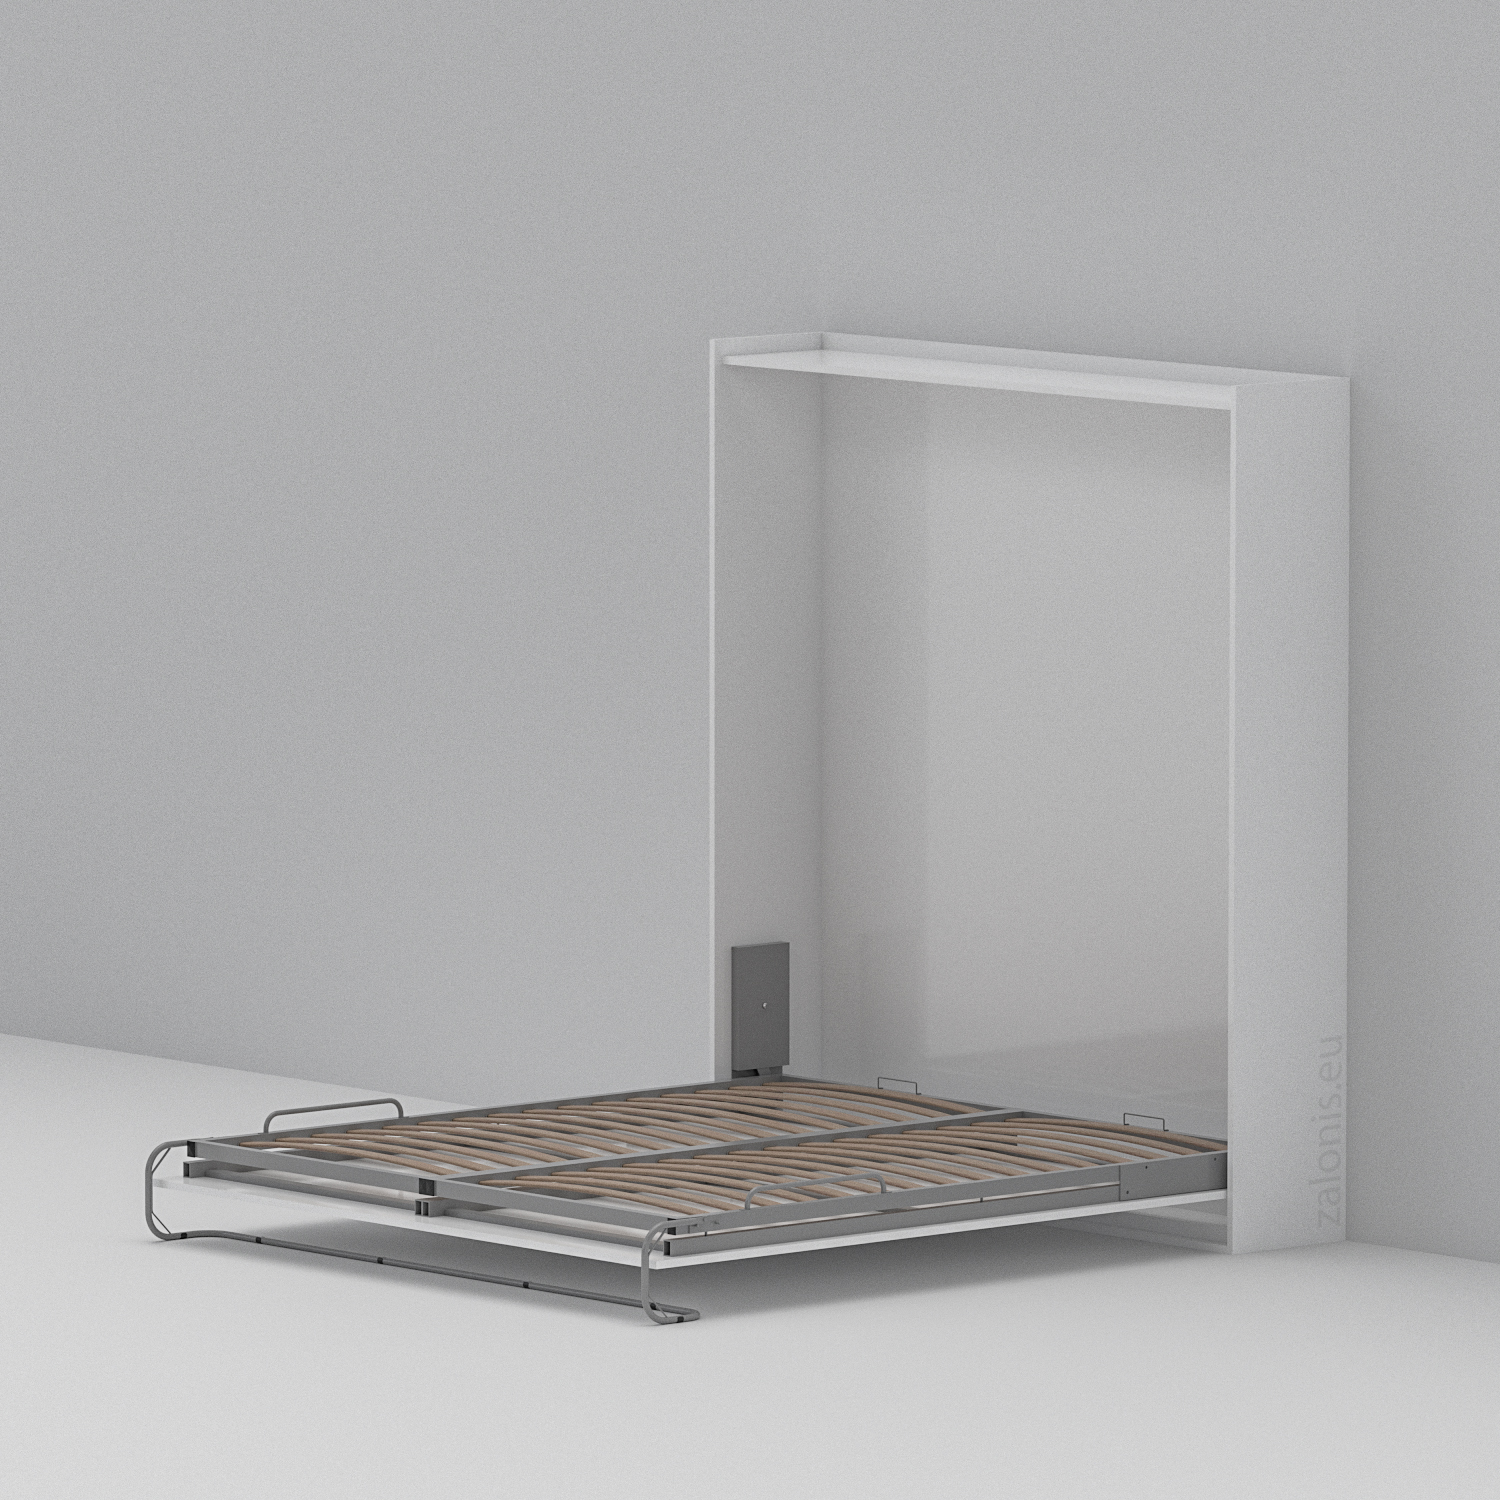 DOUBLE WALL BED - MECHANISM, LEG AND FRAME